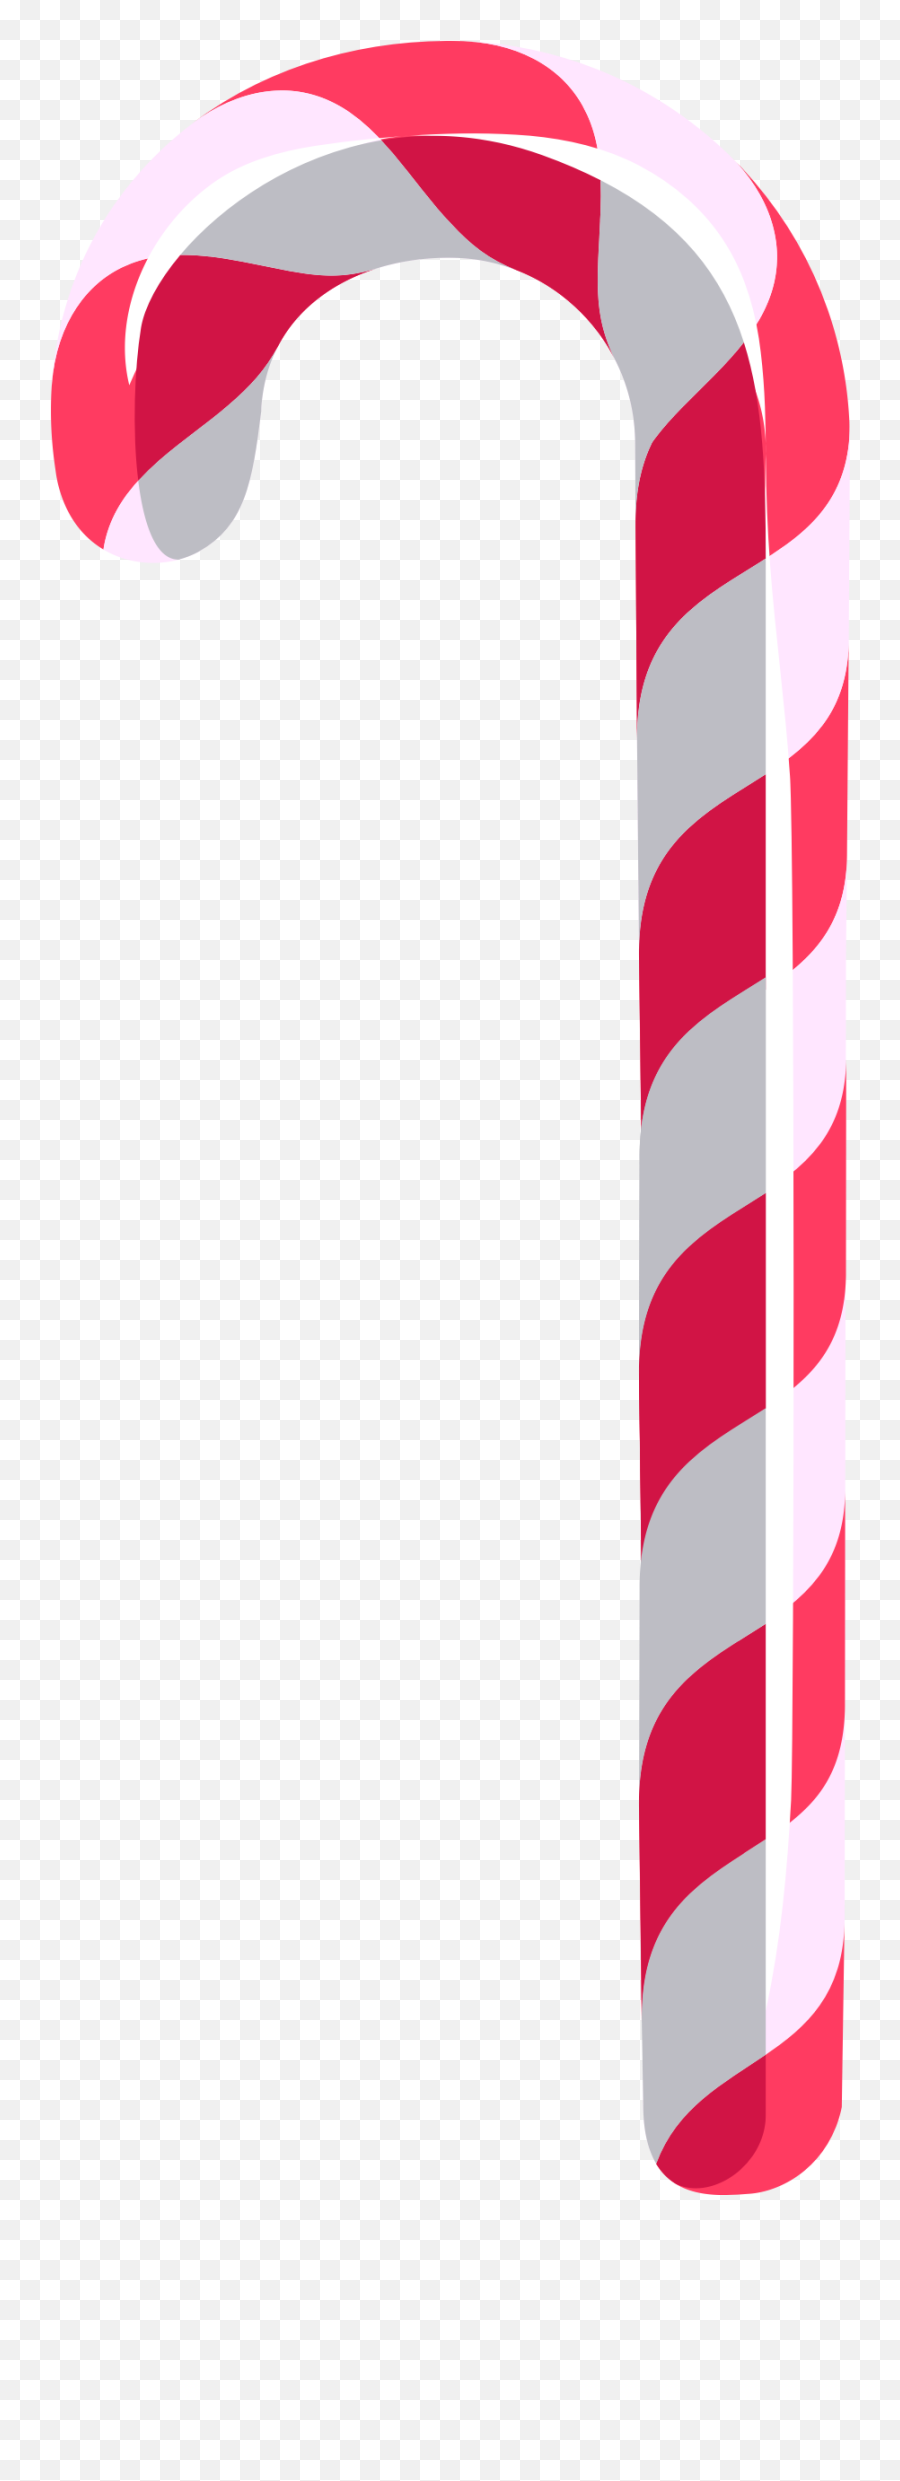 Download Candy Cane Clipart Pink - Pink Candy Cane Clipart Baston De Caramelo Dibujo Png,Candy Cane Clipart Transparent Background